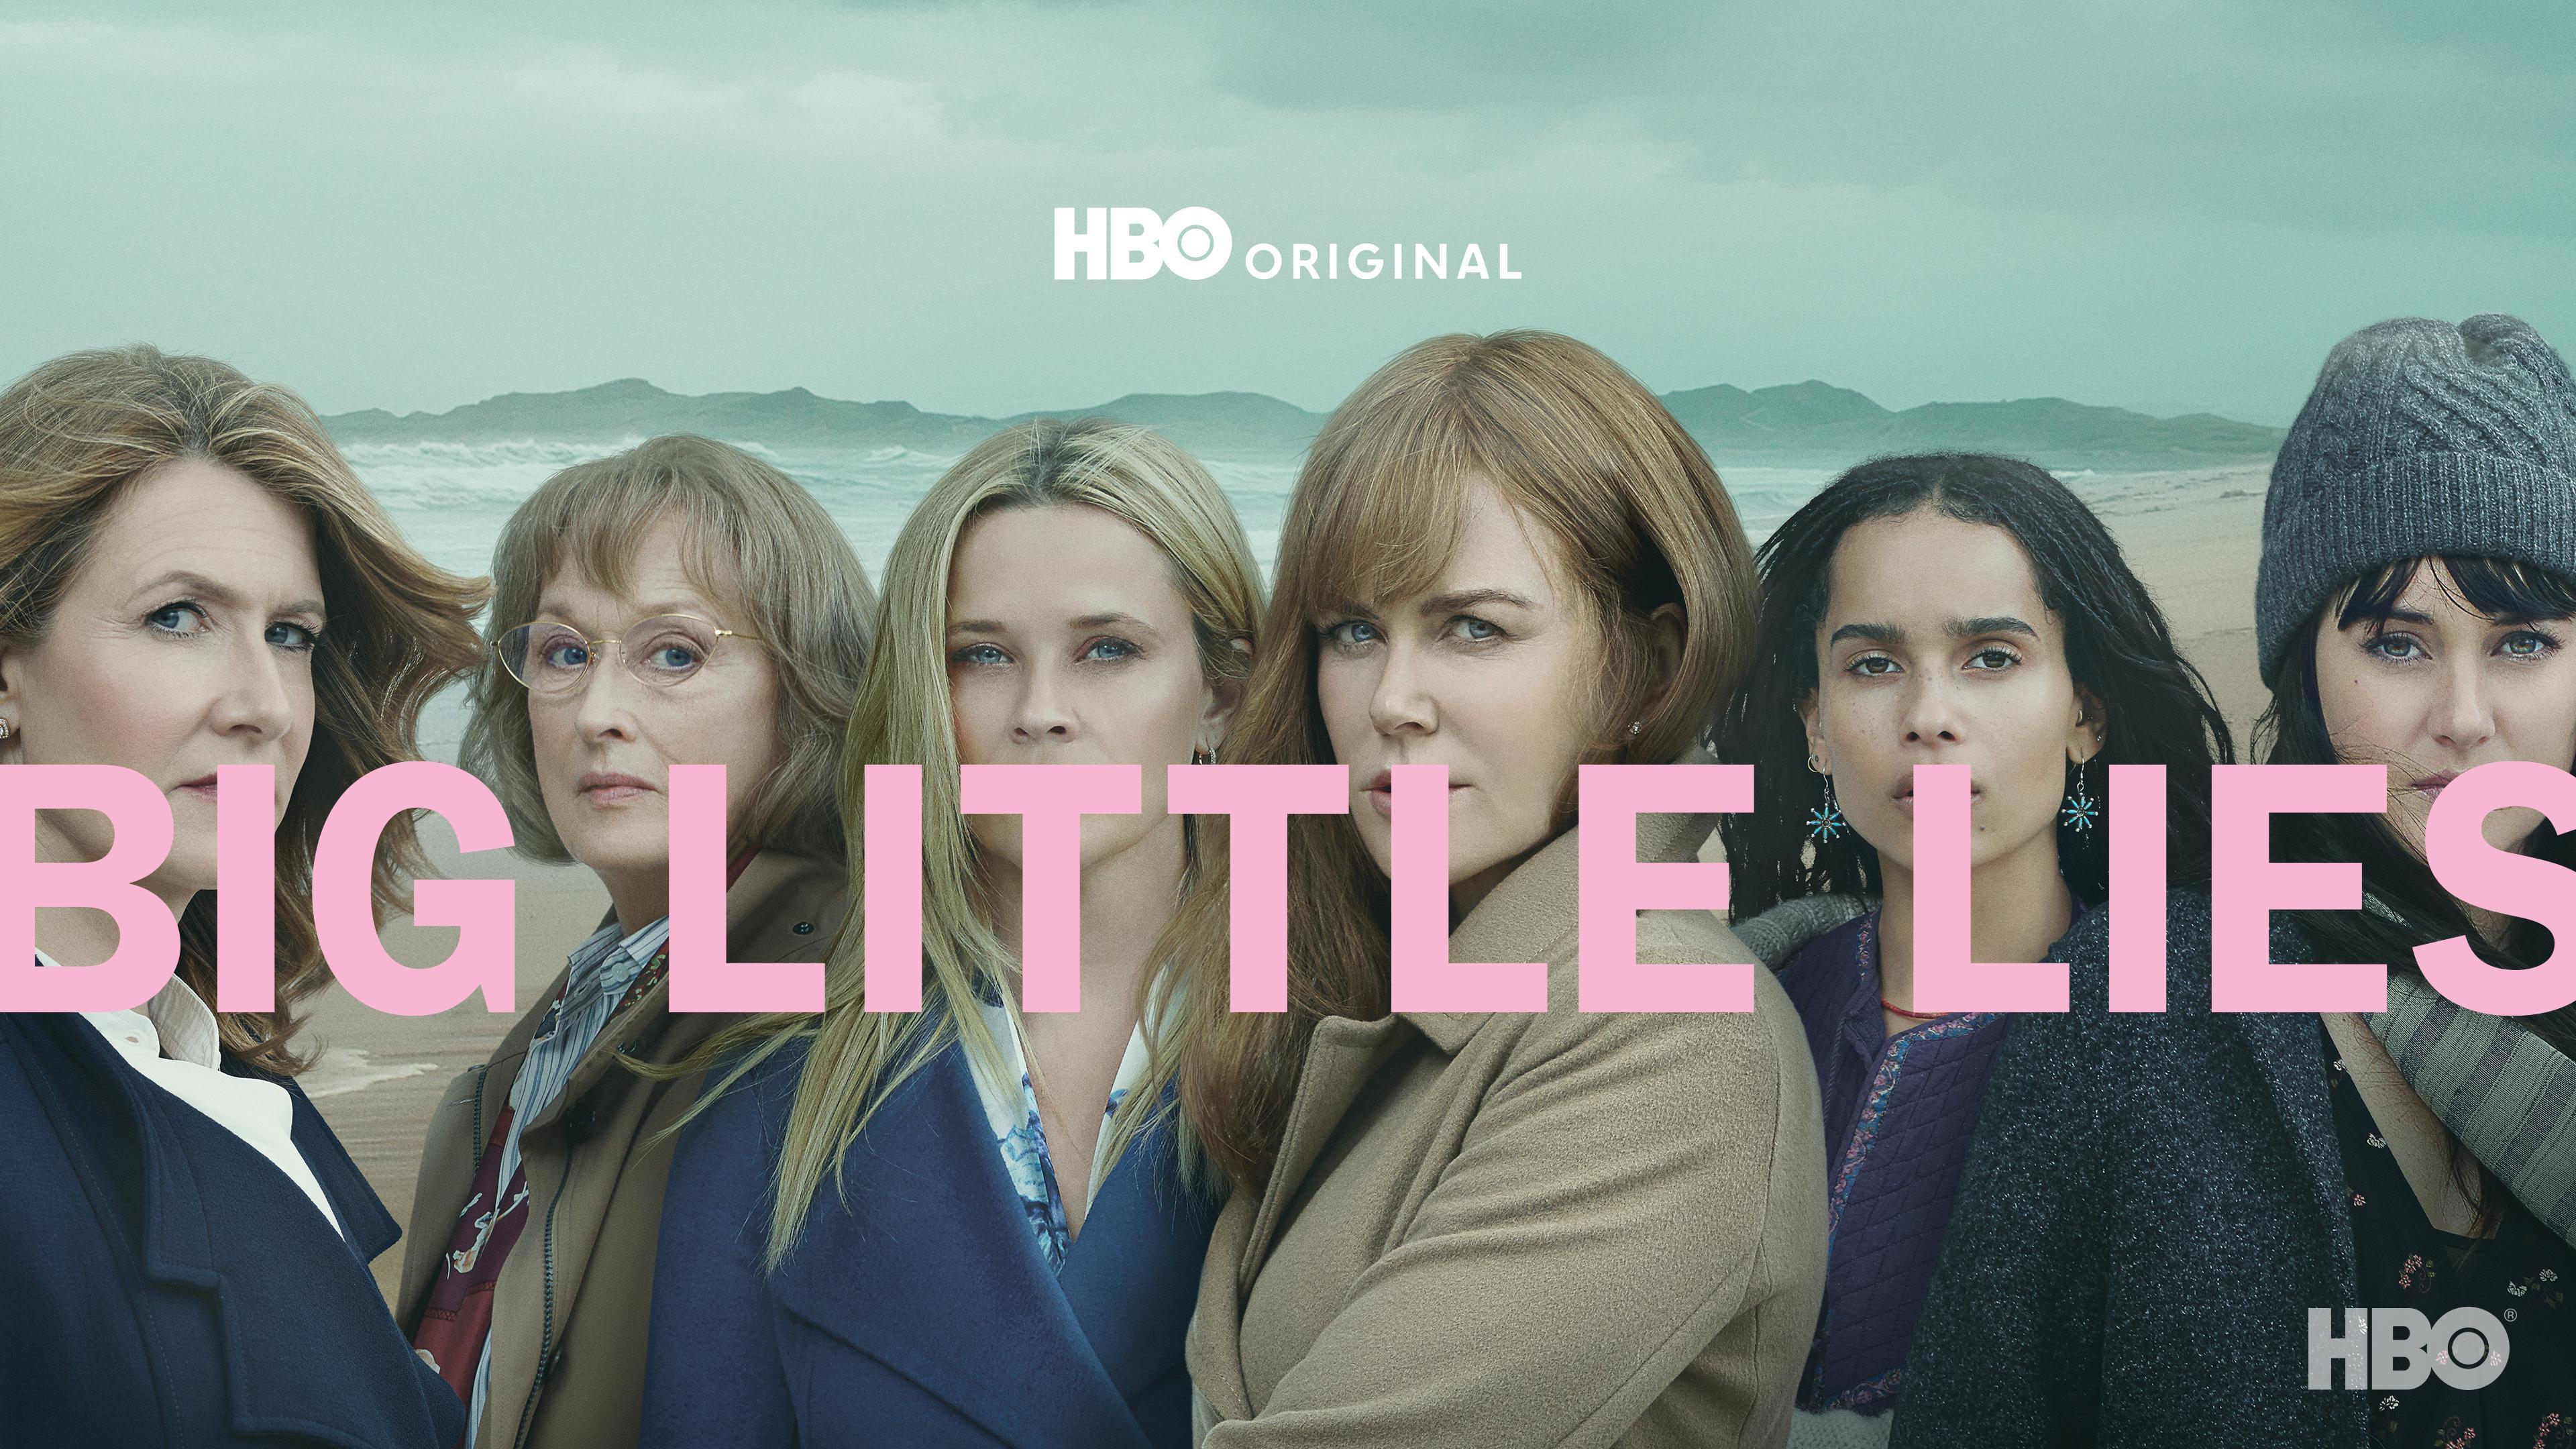 Big Little Lies, Official Website for the HBO Series